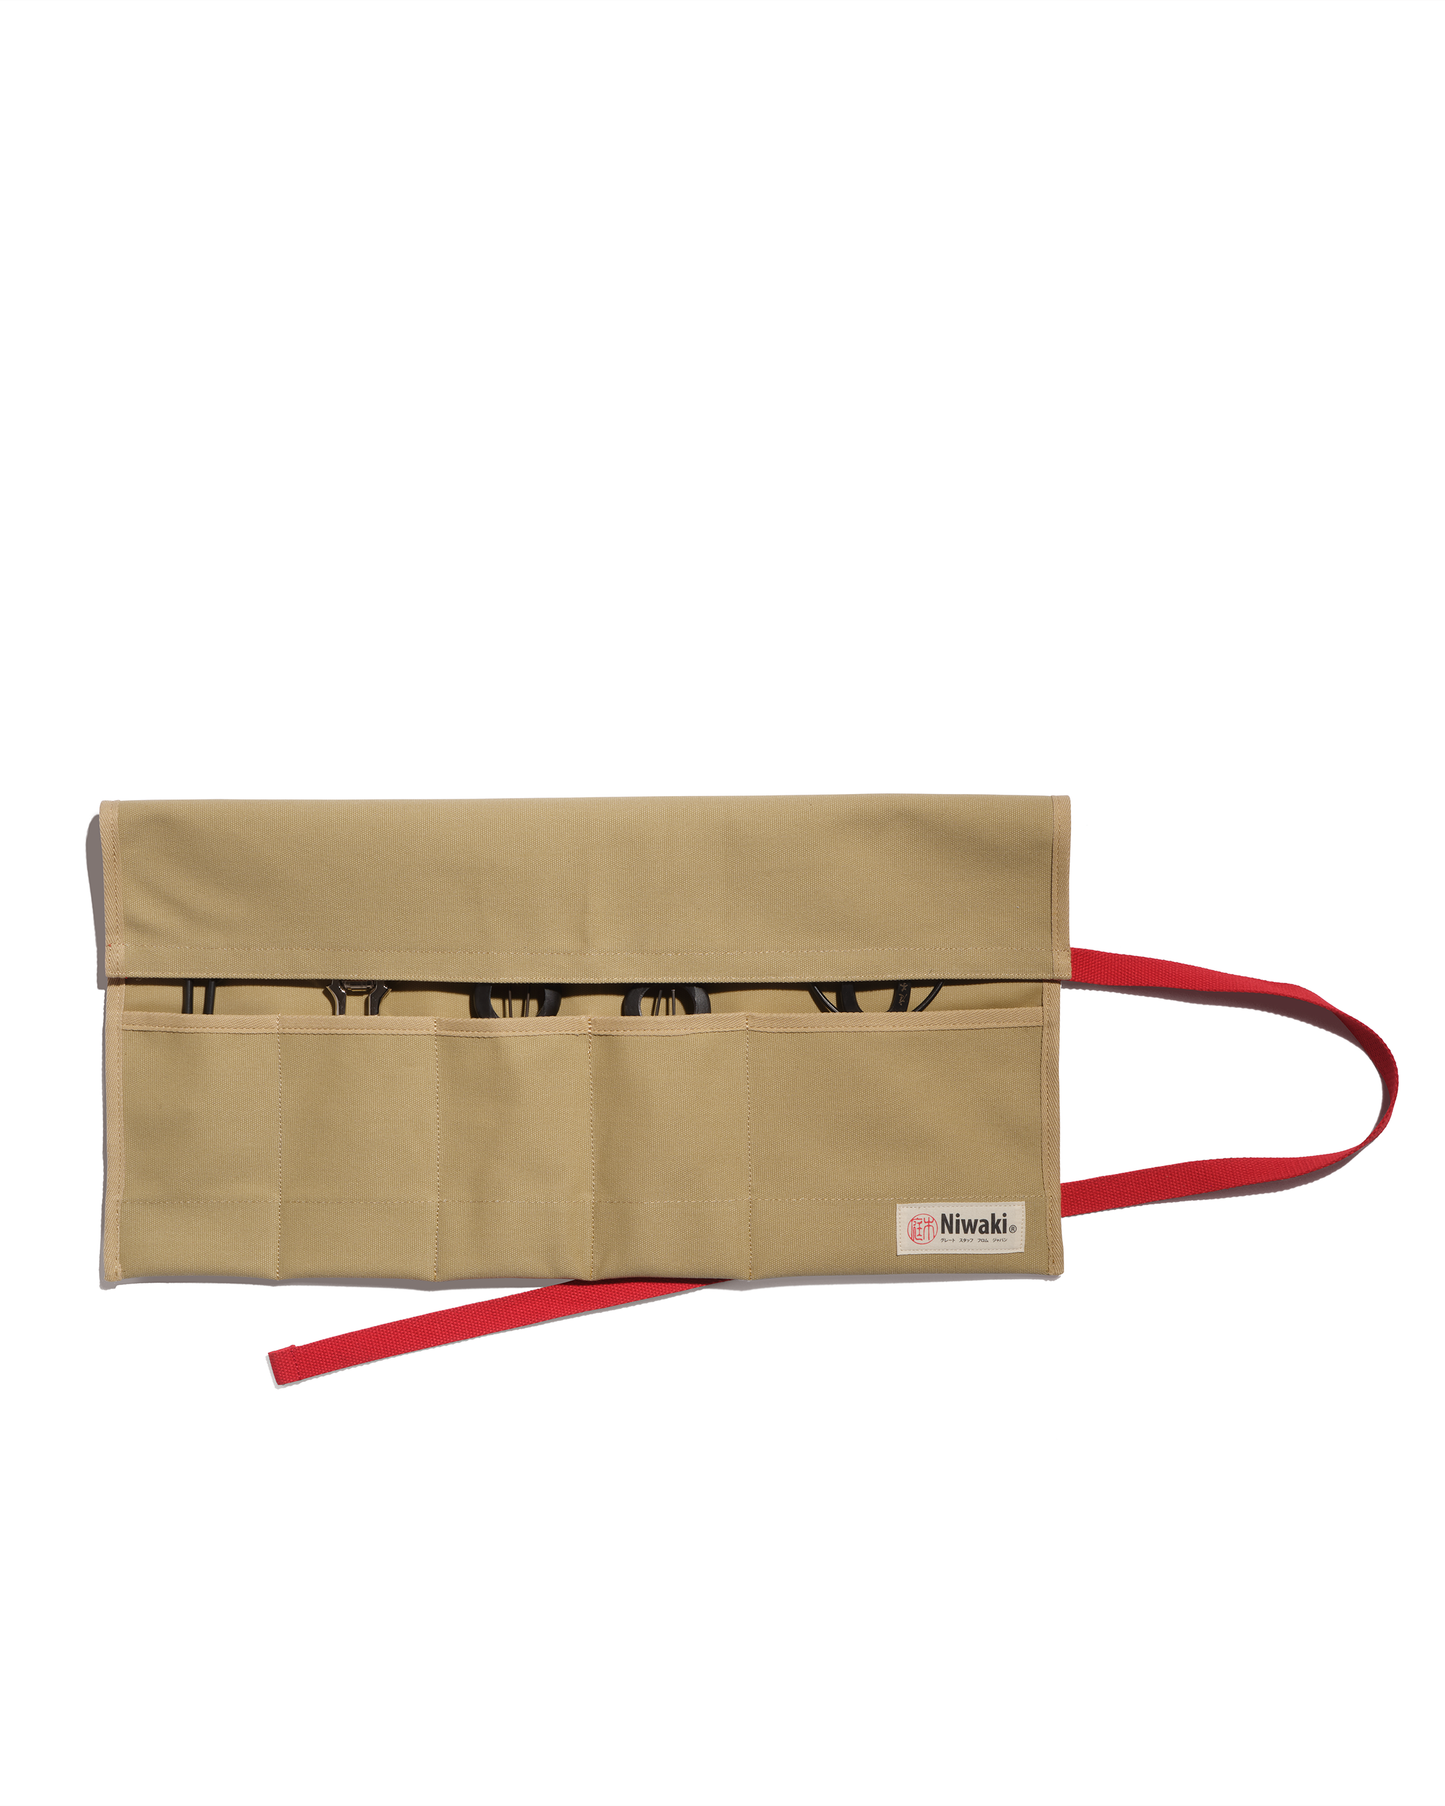 Rolled canvas beige tool holder